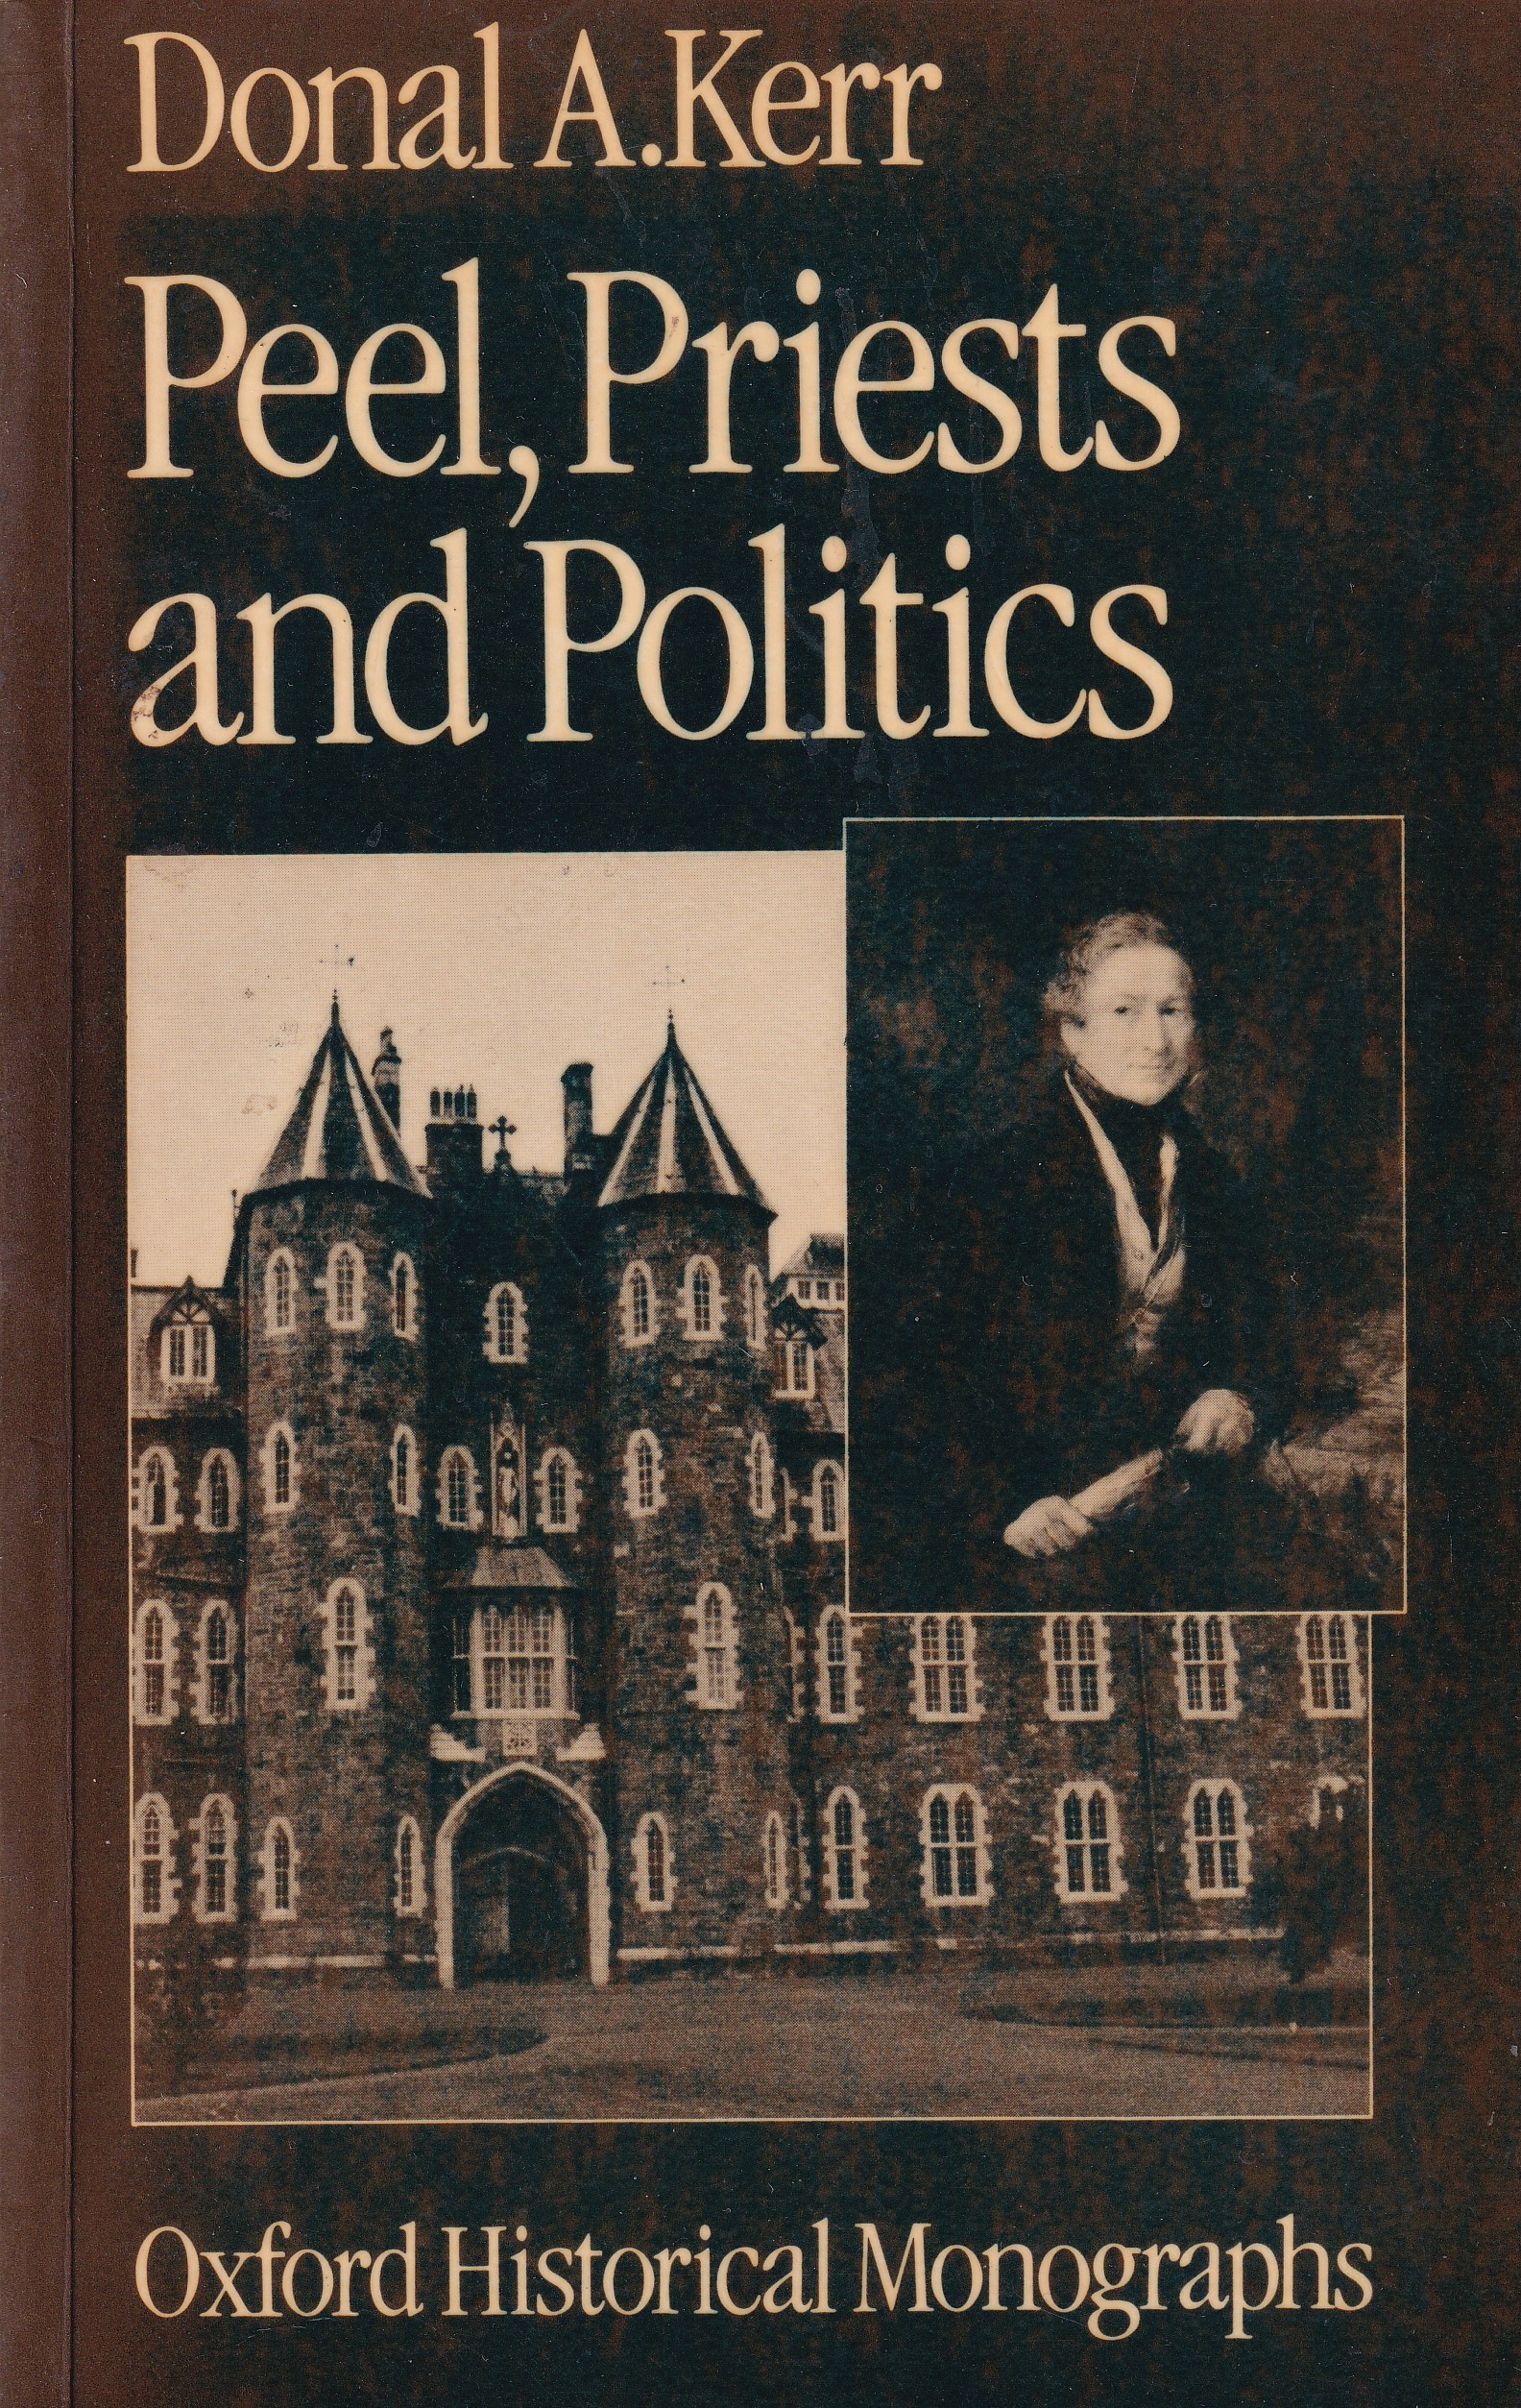 Peel, Priests and Politics: Sir Robert Peel’s Administration and the Roman Catholic Church in Ireland, 1841-1846 by Donal A. Kerr